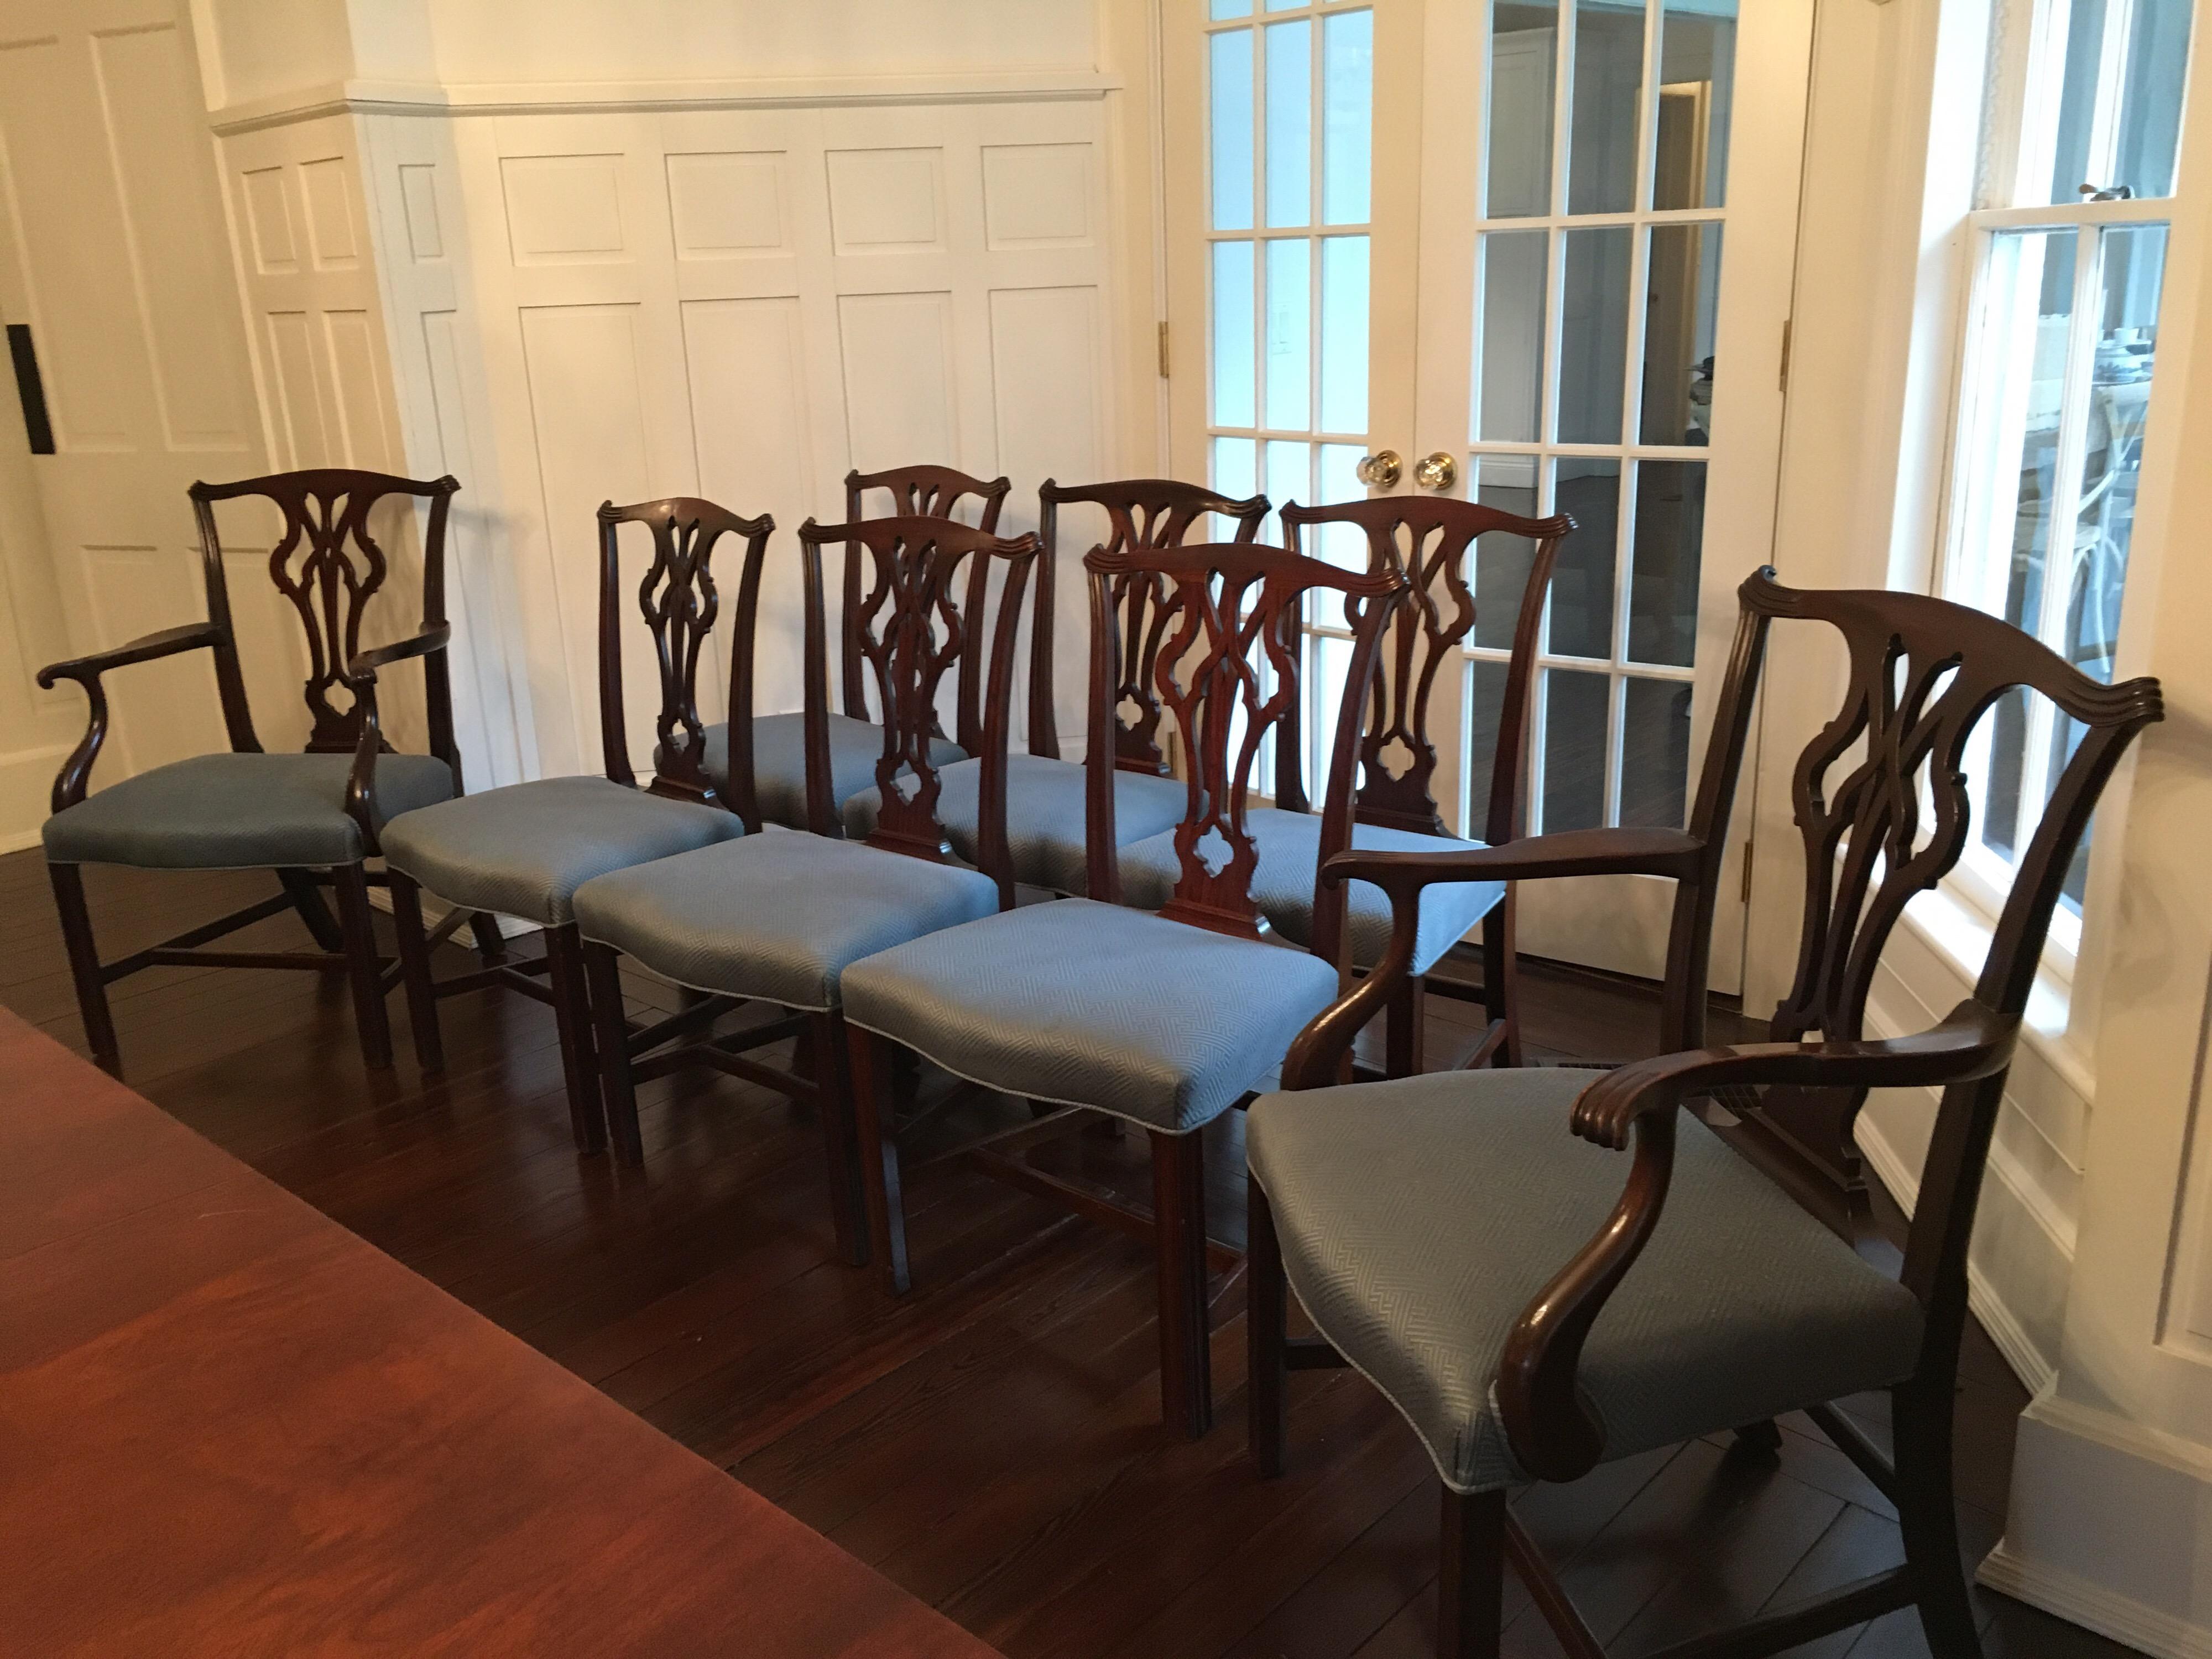 Set of eight early 20th century Chippendale style dining chairs in blue Greek key fabric.
Armchair dims: 26.5